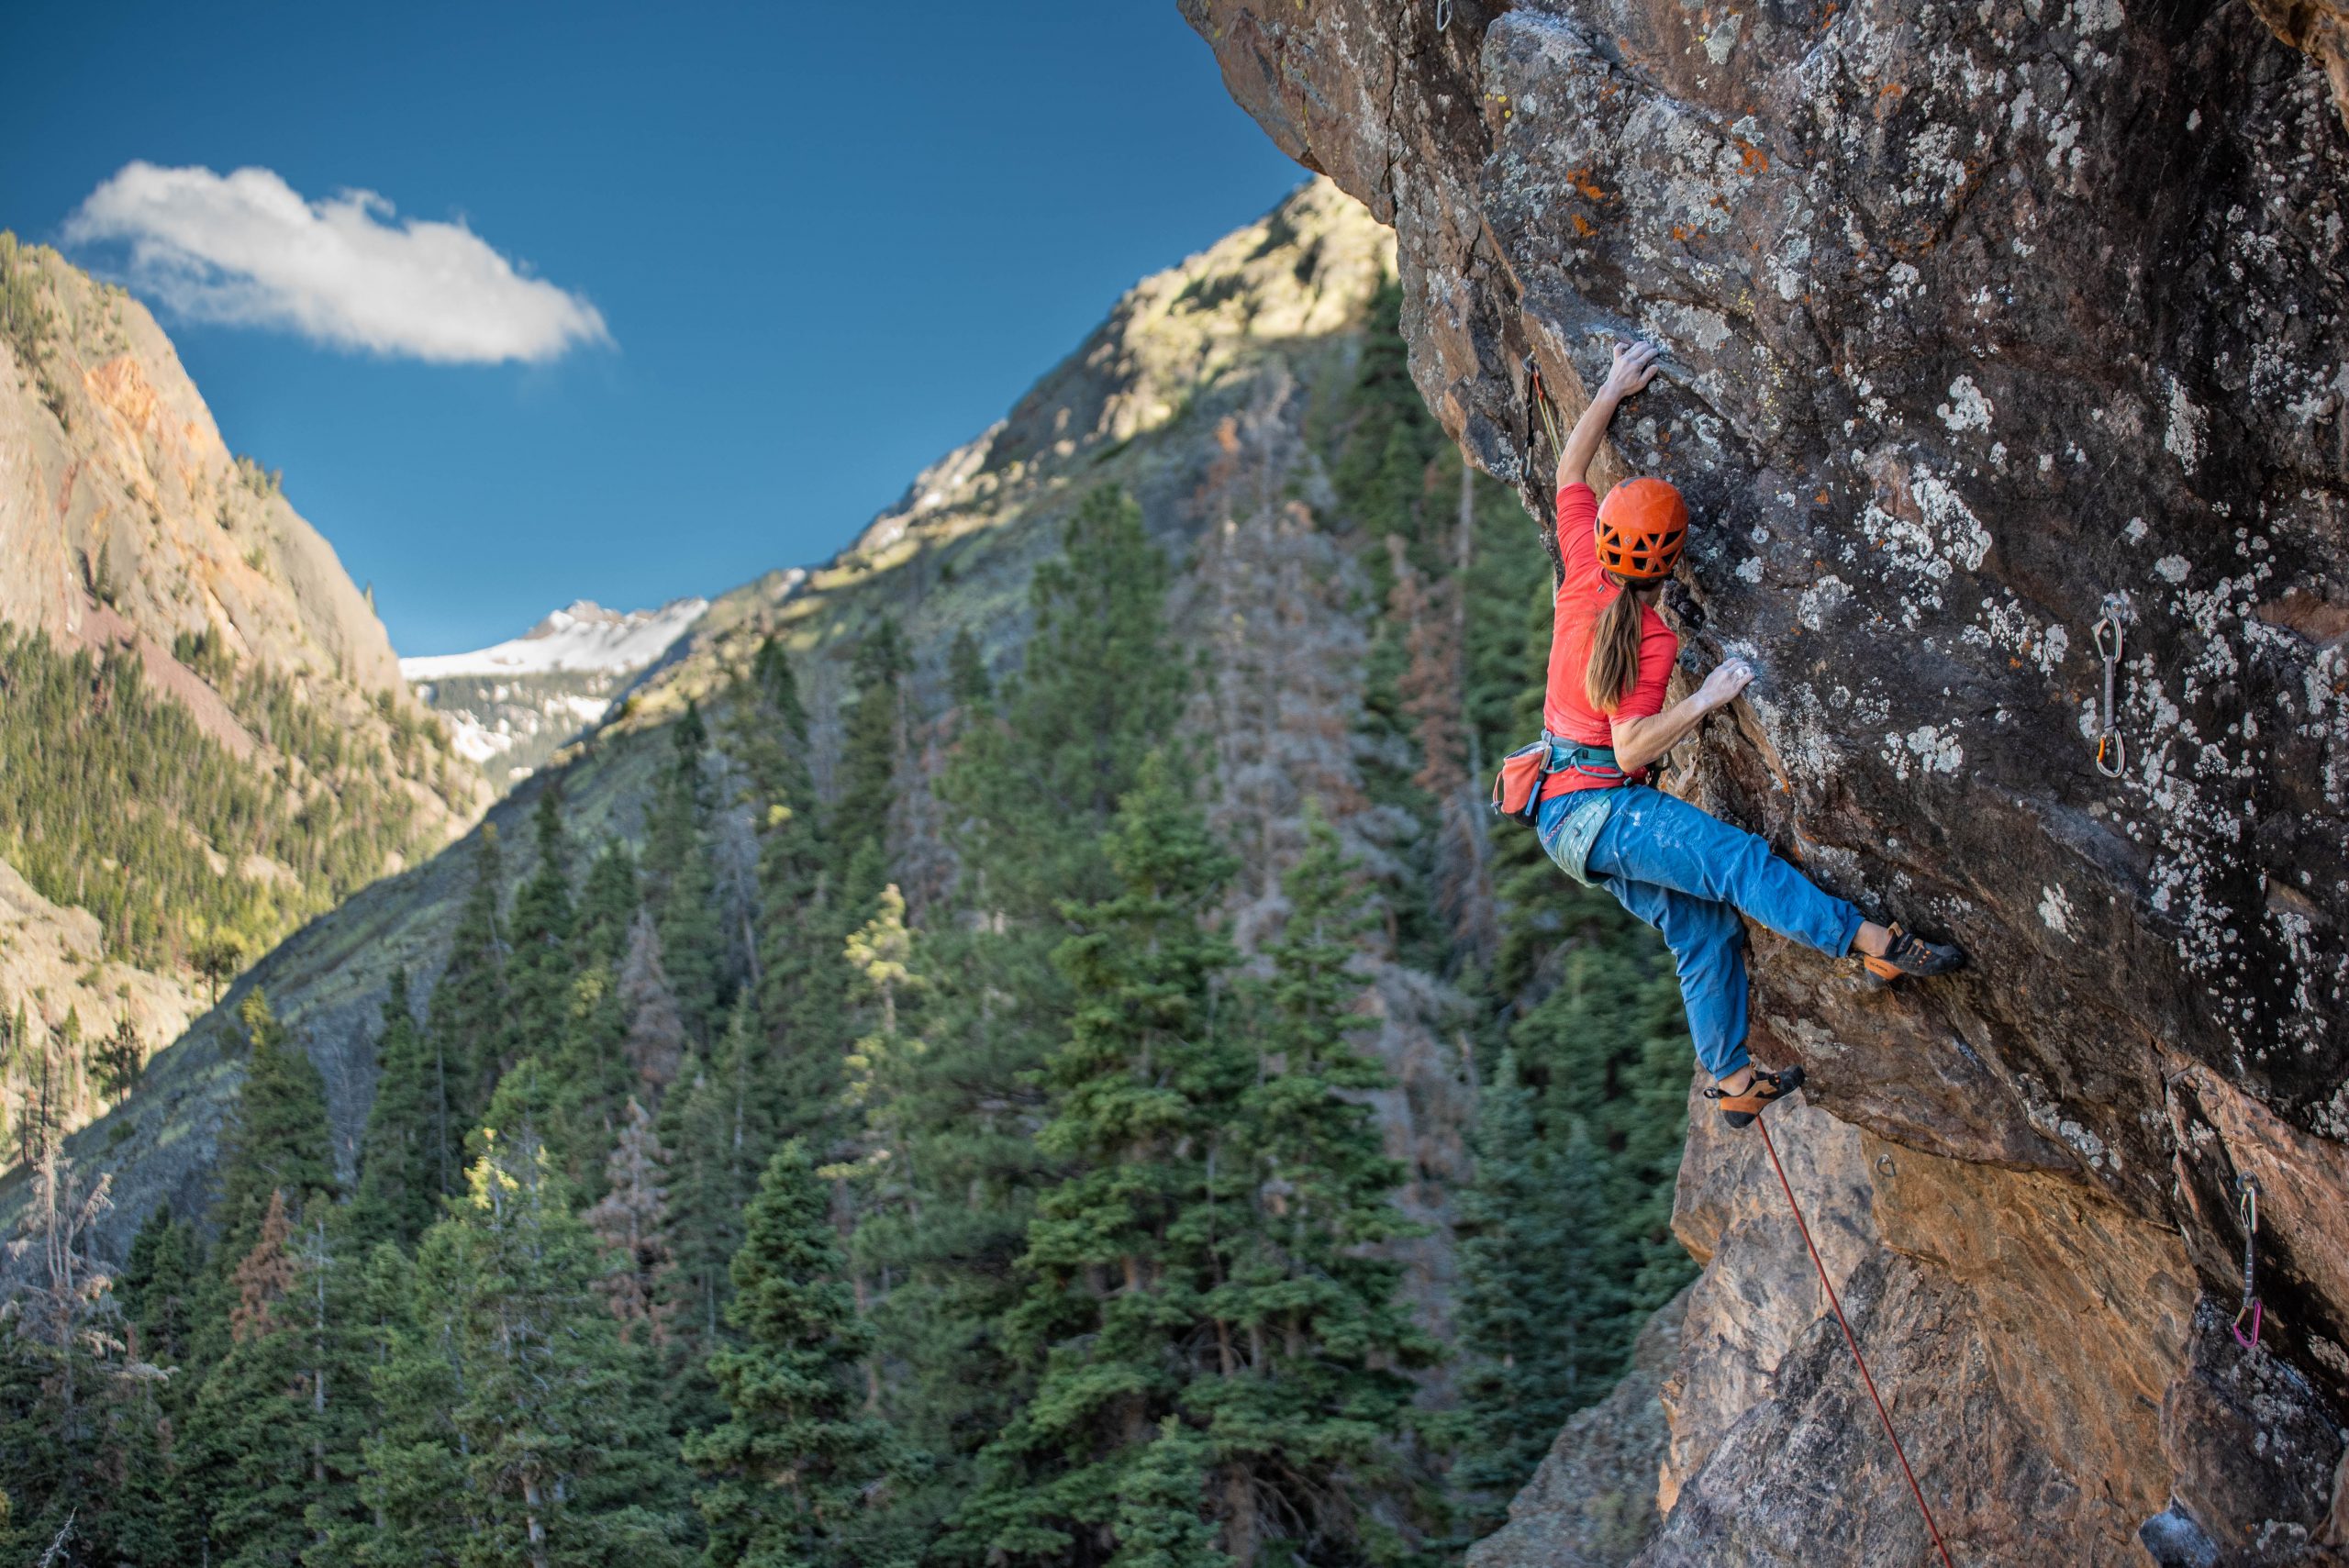 A photo of a woman climbing an overhanging bolted arête with mountains in the background.